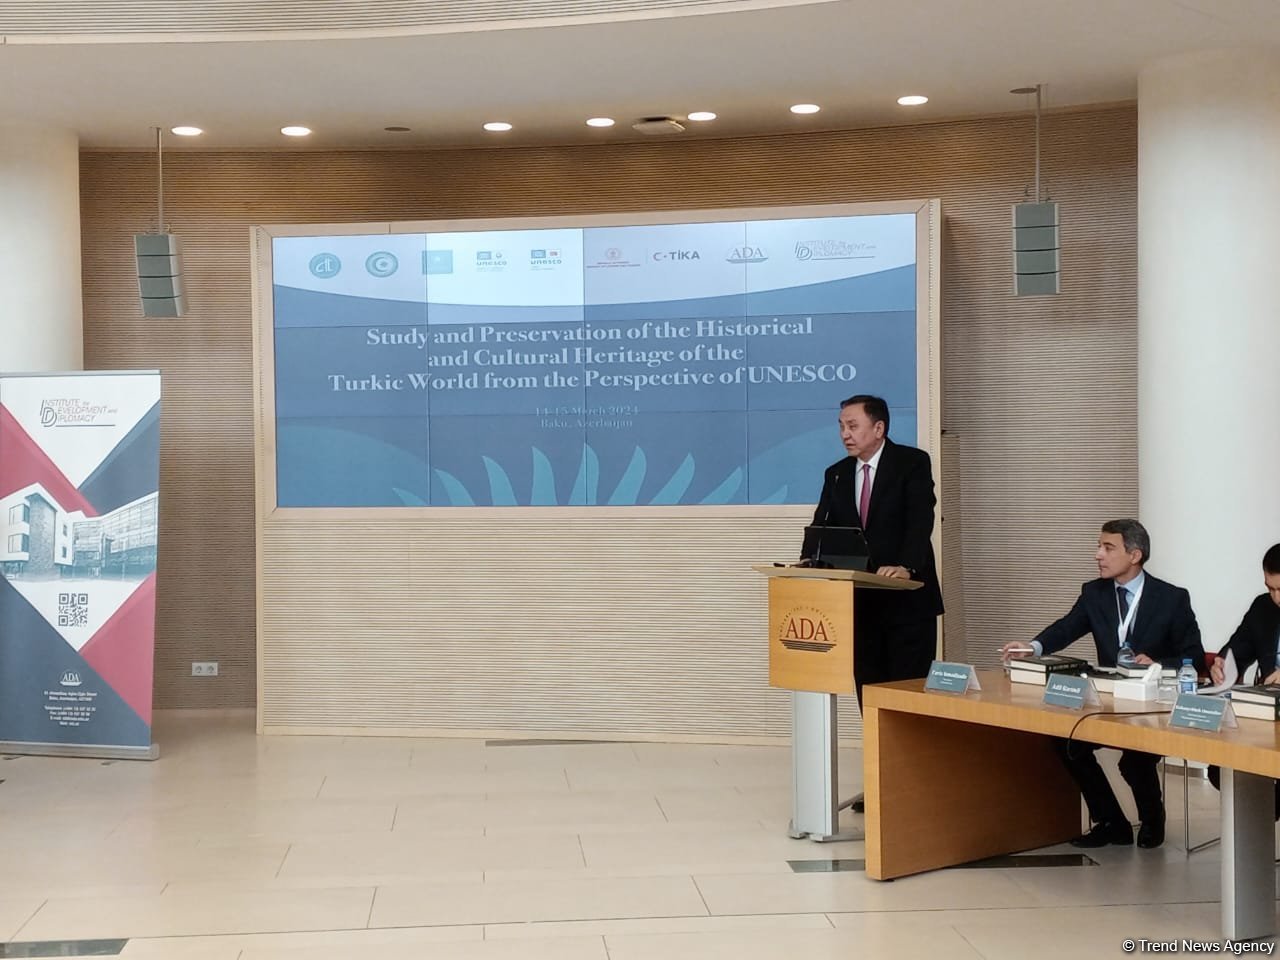 Culture plays key role in cooperation between Turkic countries - OTS SecGen